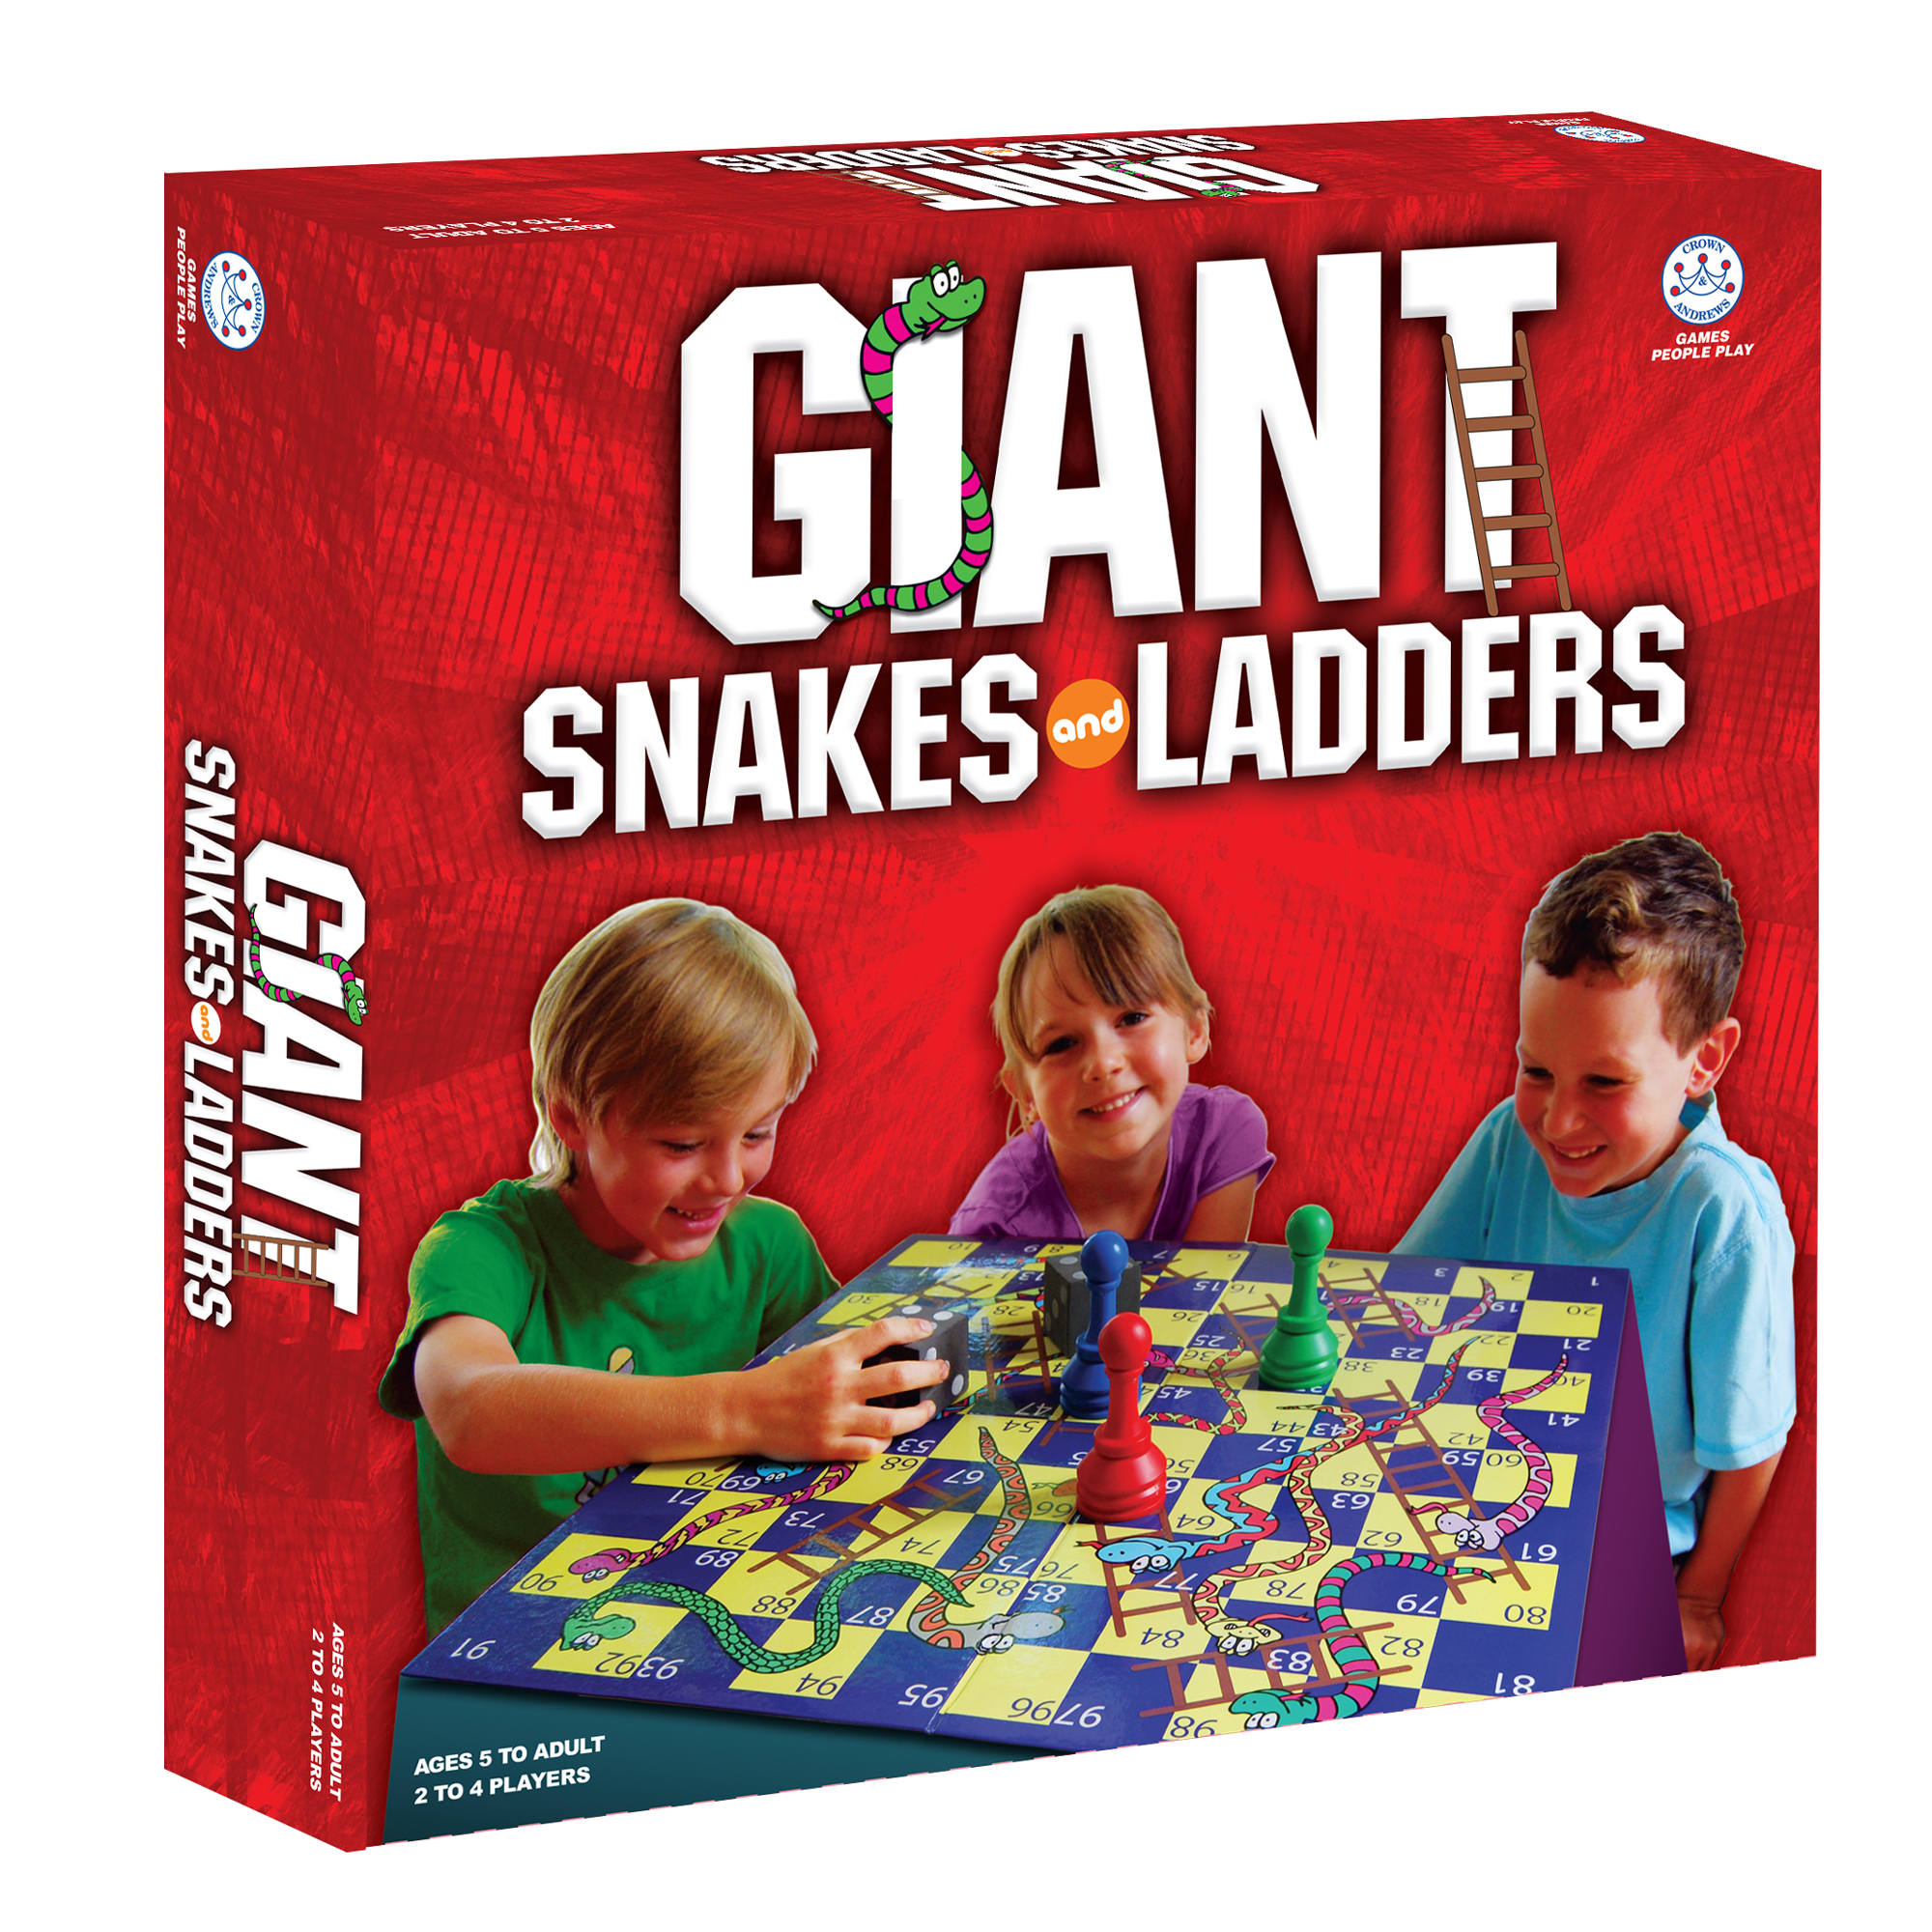 Pressman Toys - Giant Snakes and Ladders Game - image 1 of 4